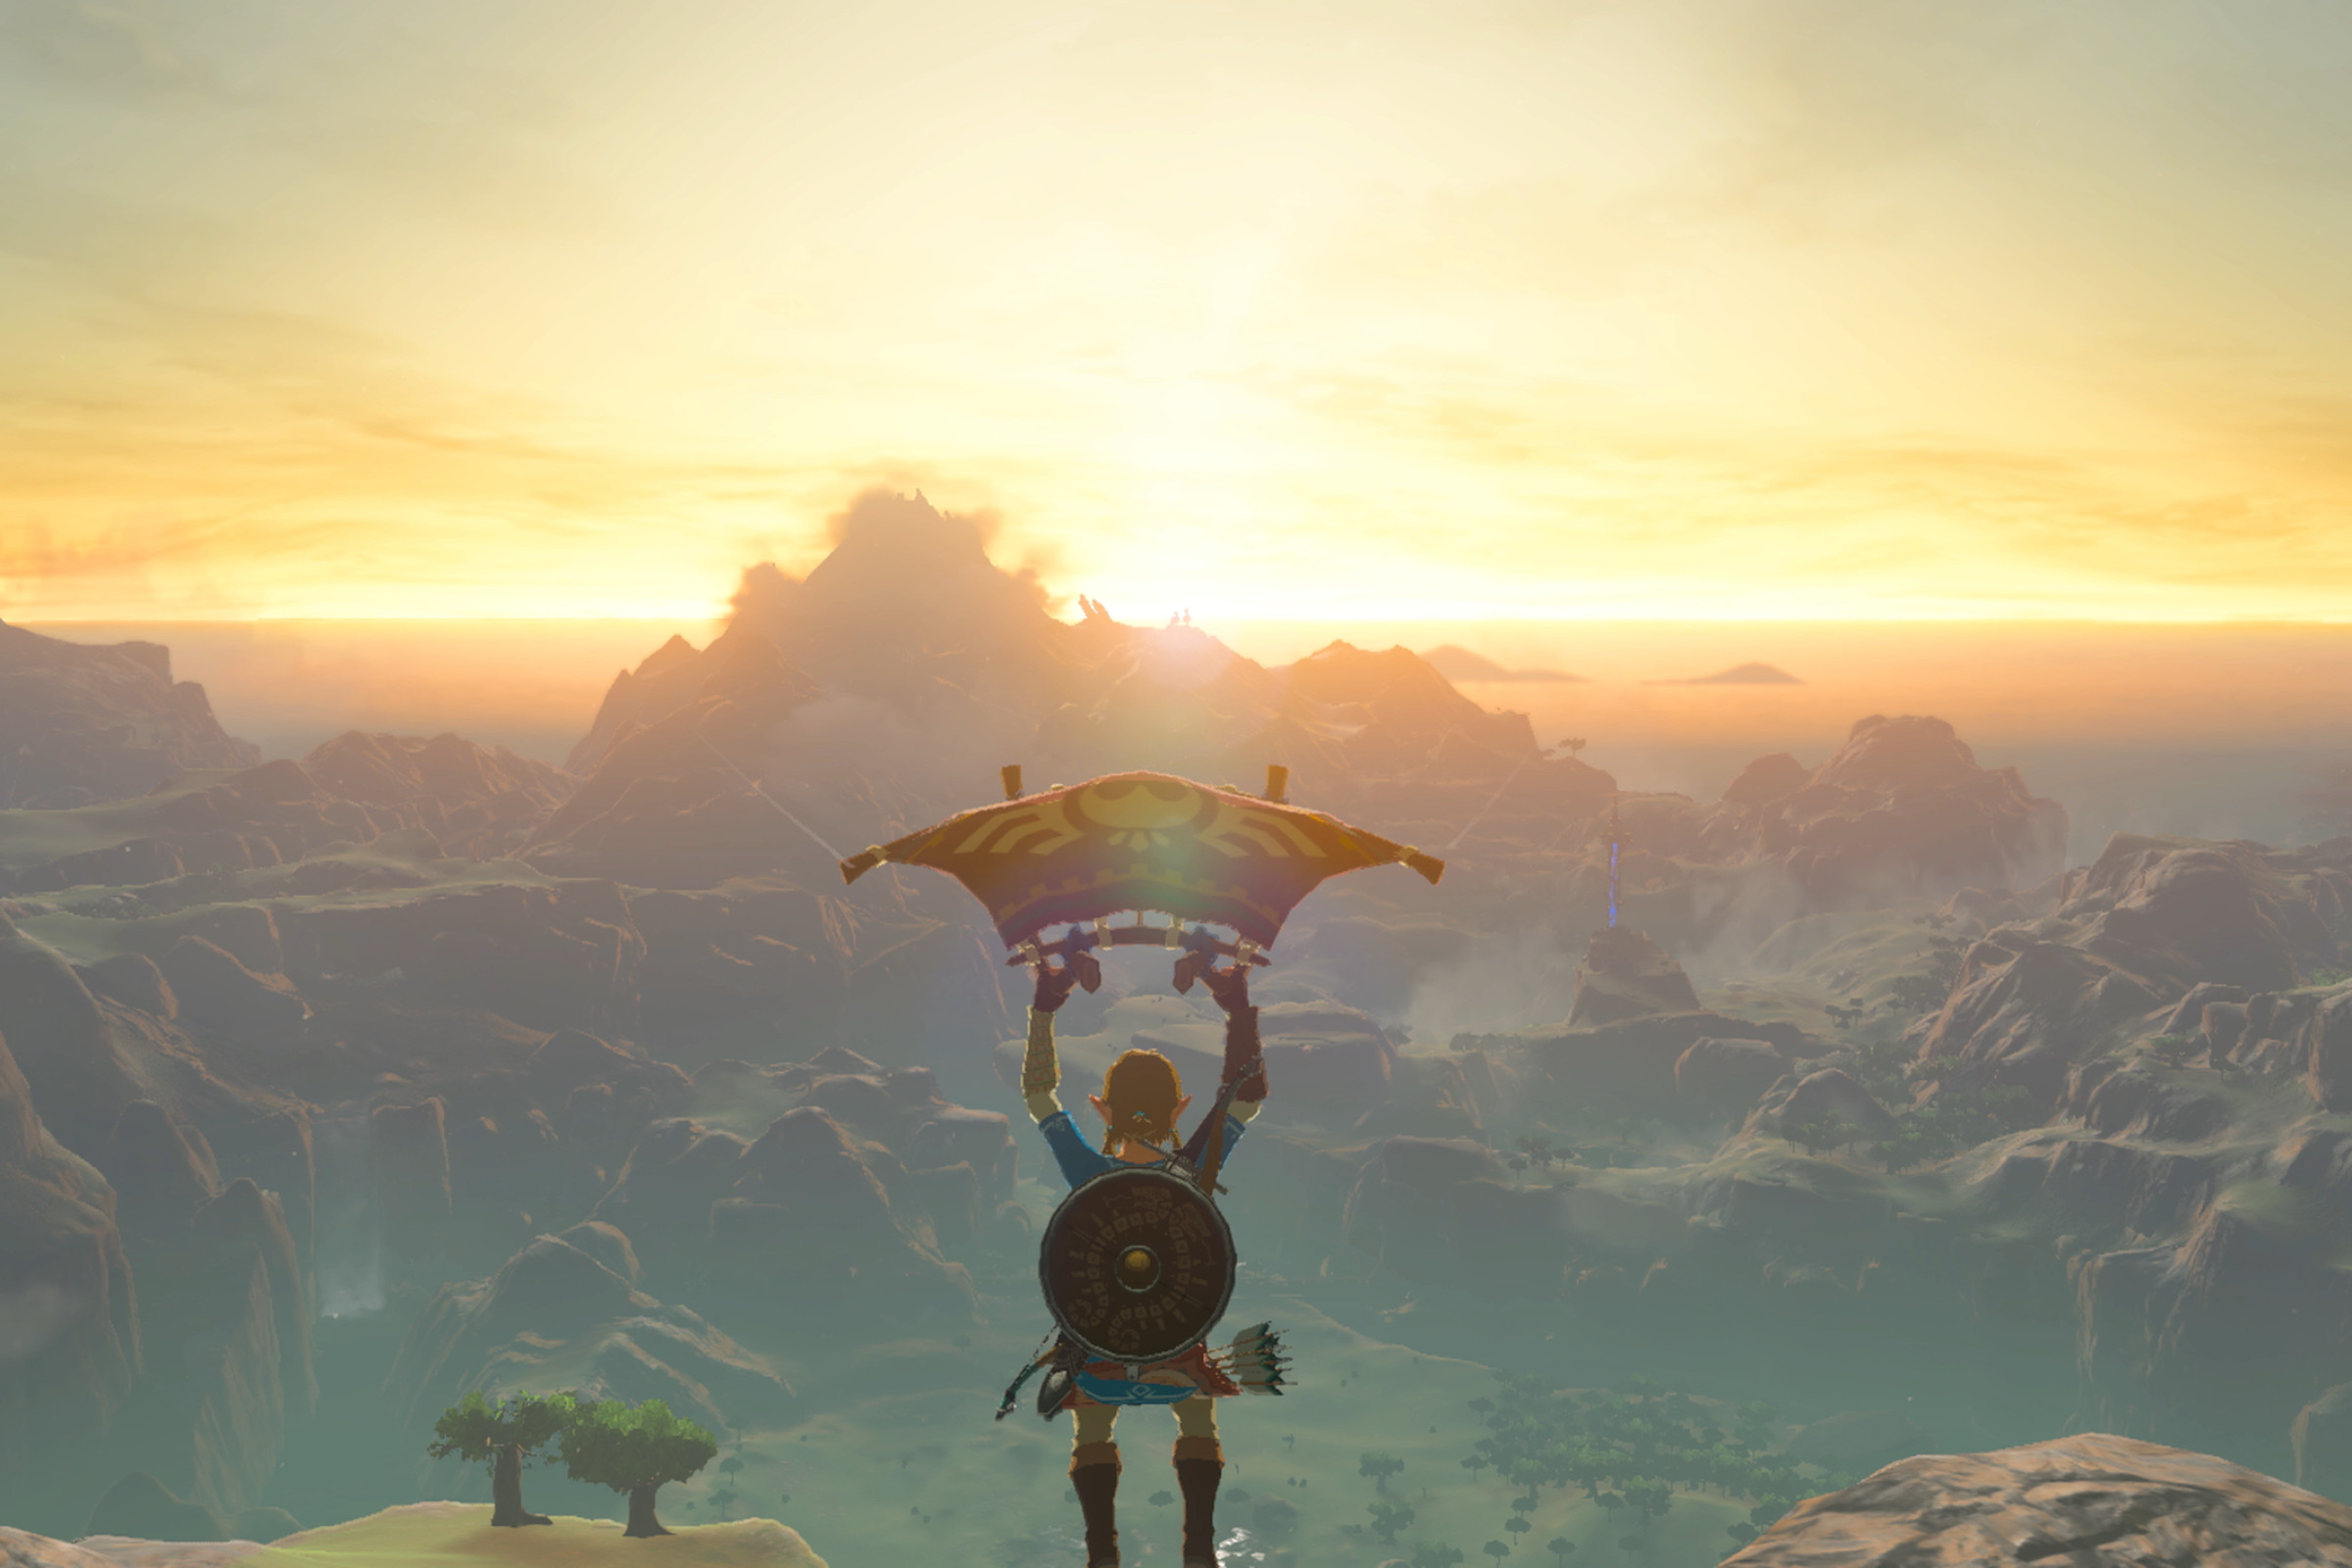 A screenshot from The Legend of Zelda: Breath of the Wild showing Link paragliding toward a golden-colored sunset.